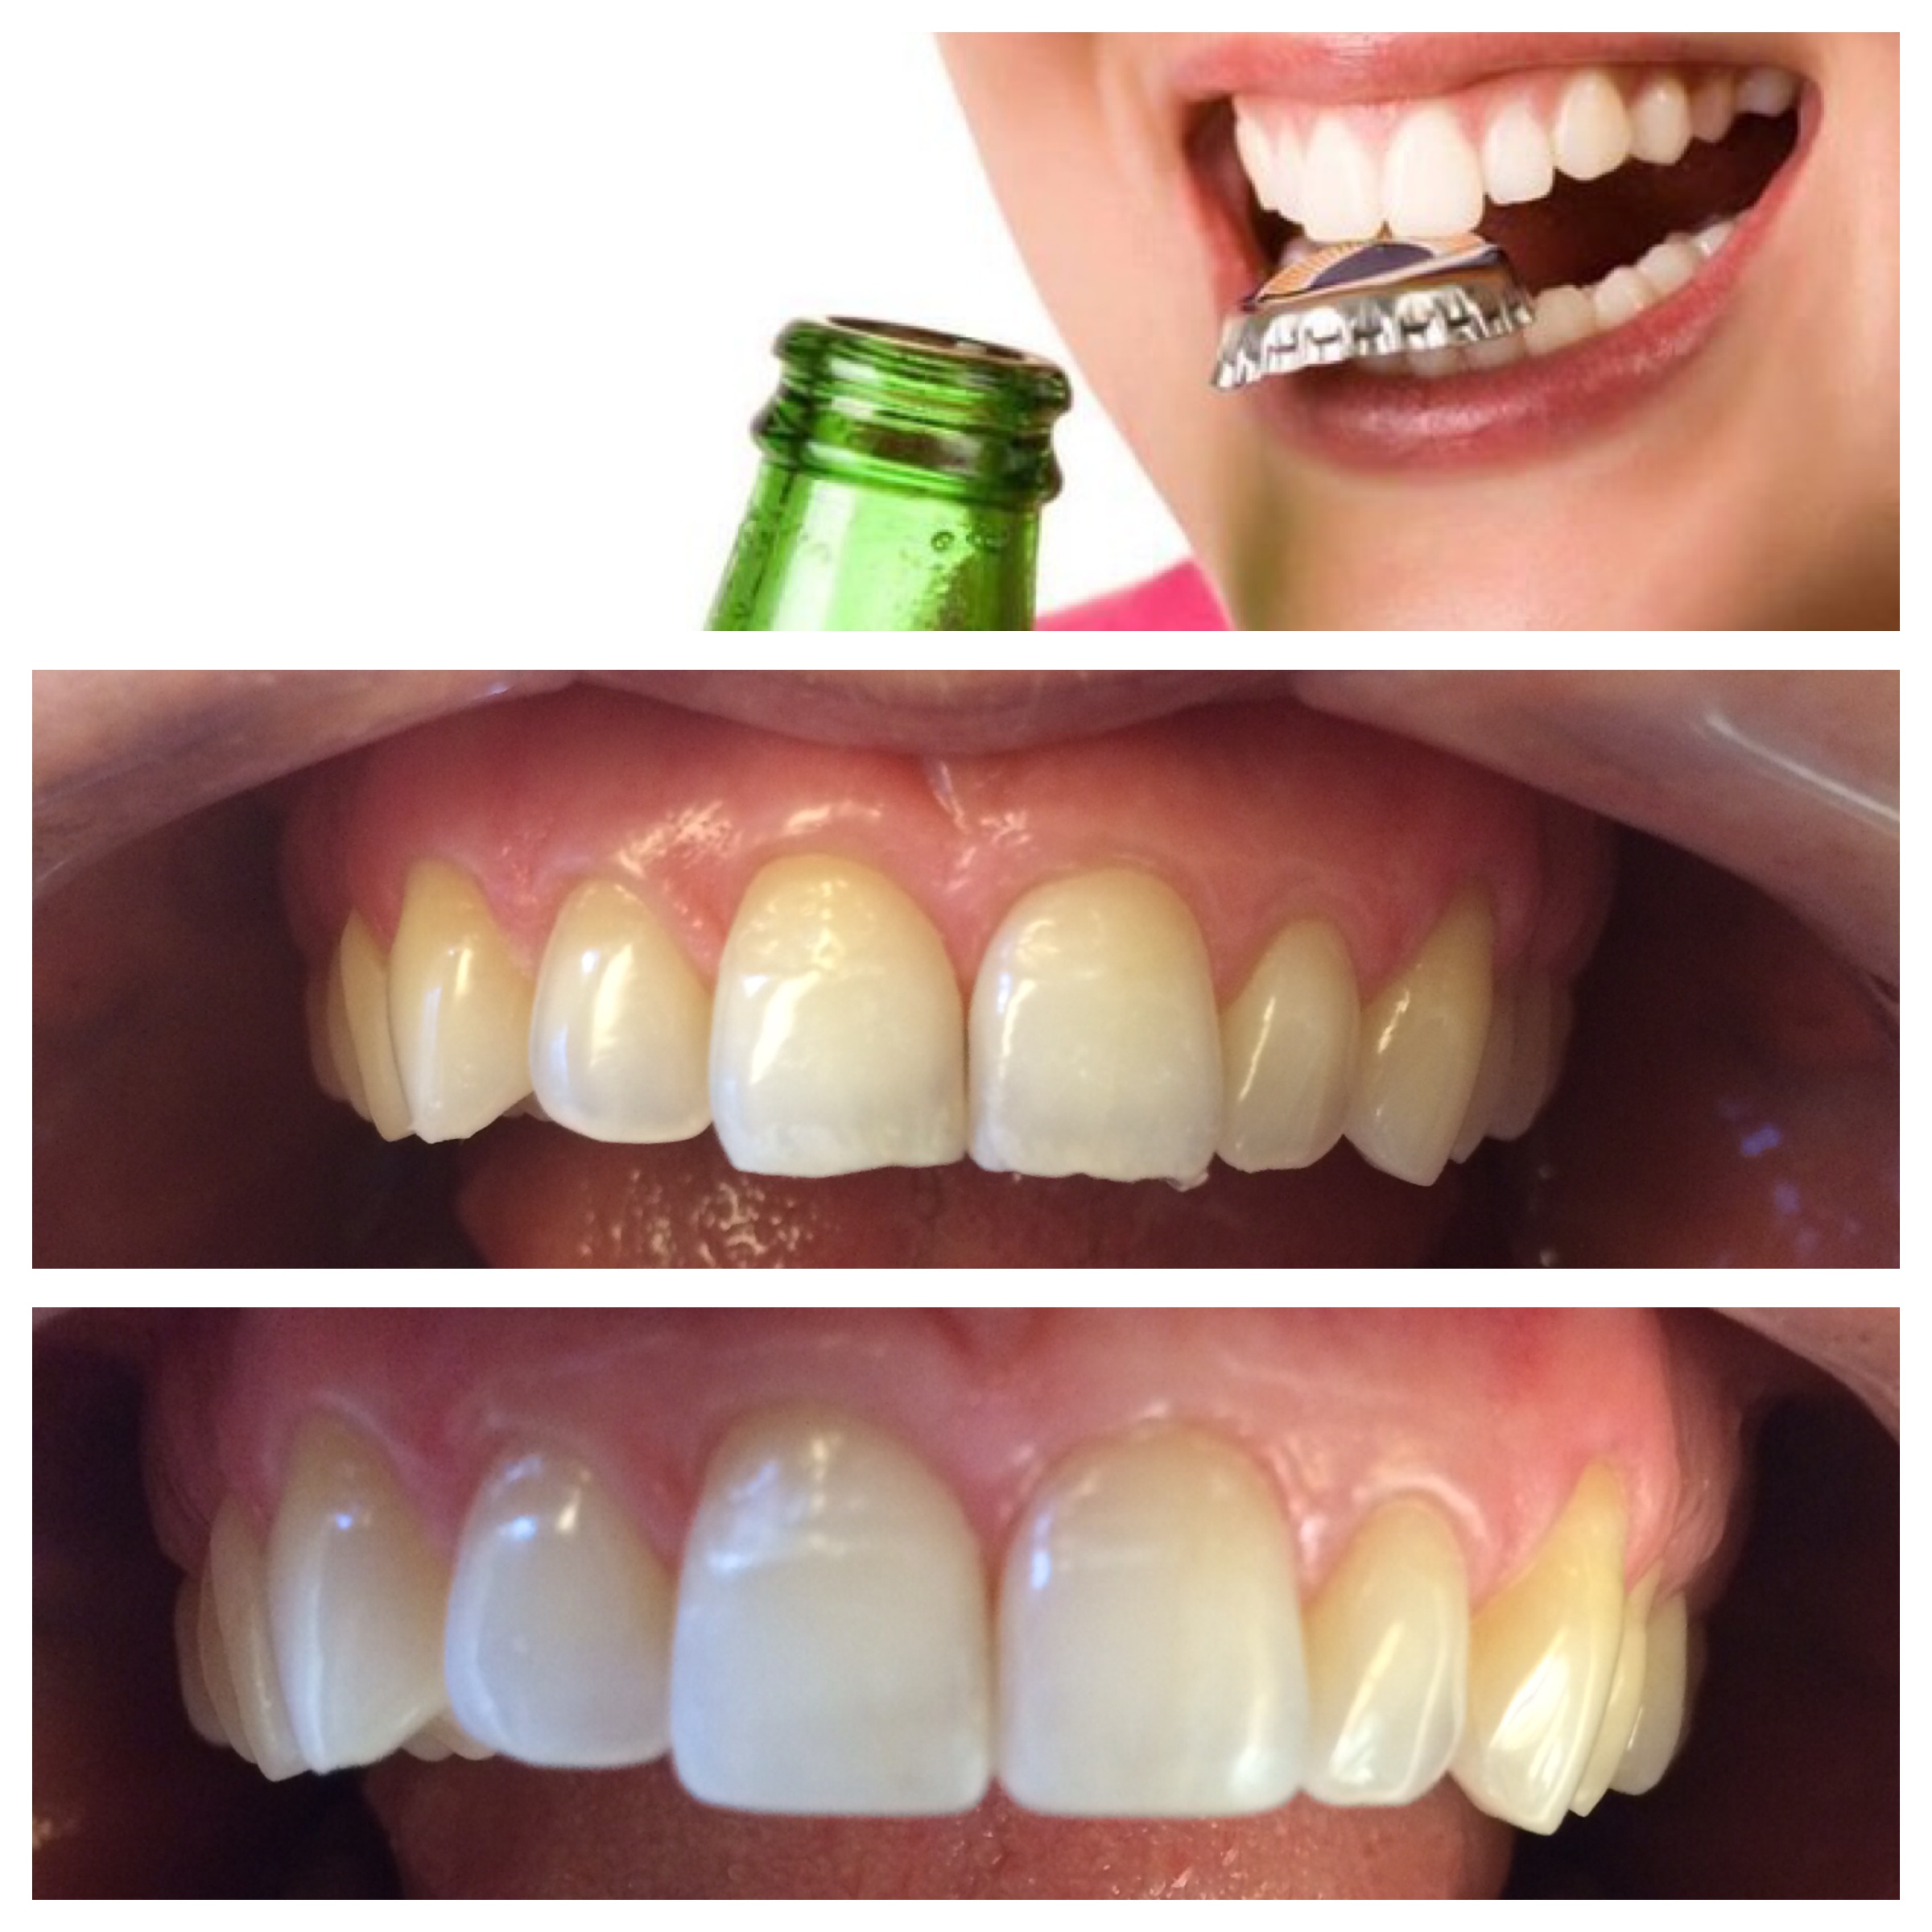 Chipped Tooth Repair with Chipped Tooth Bonding - Oral-B